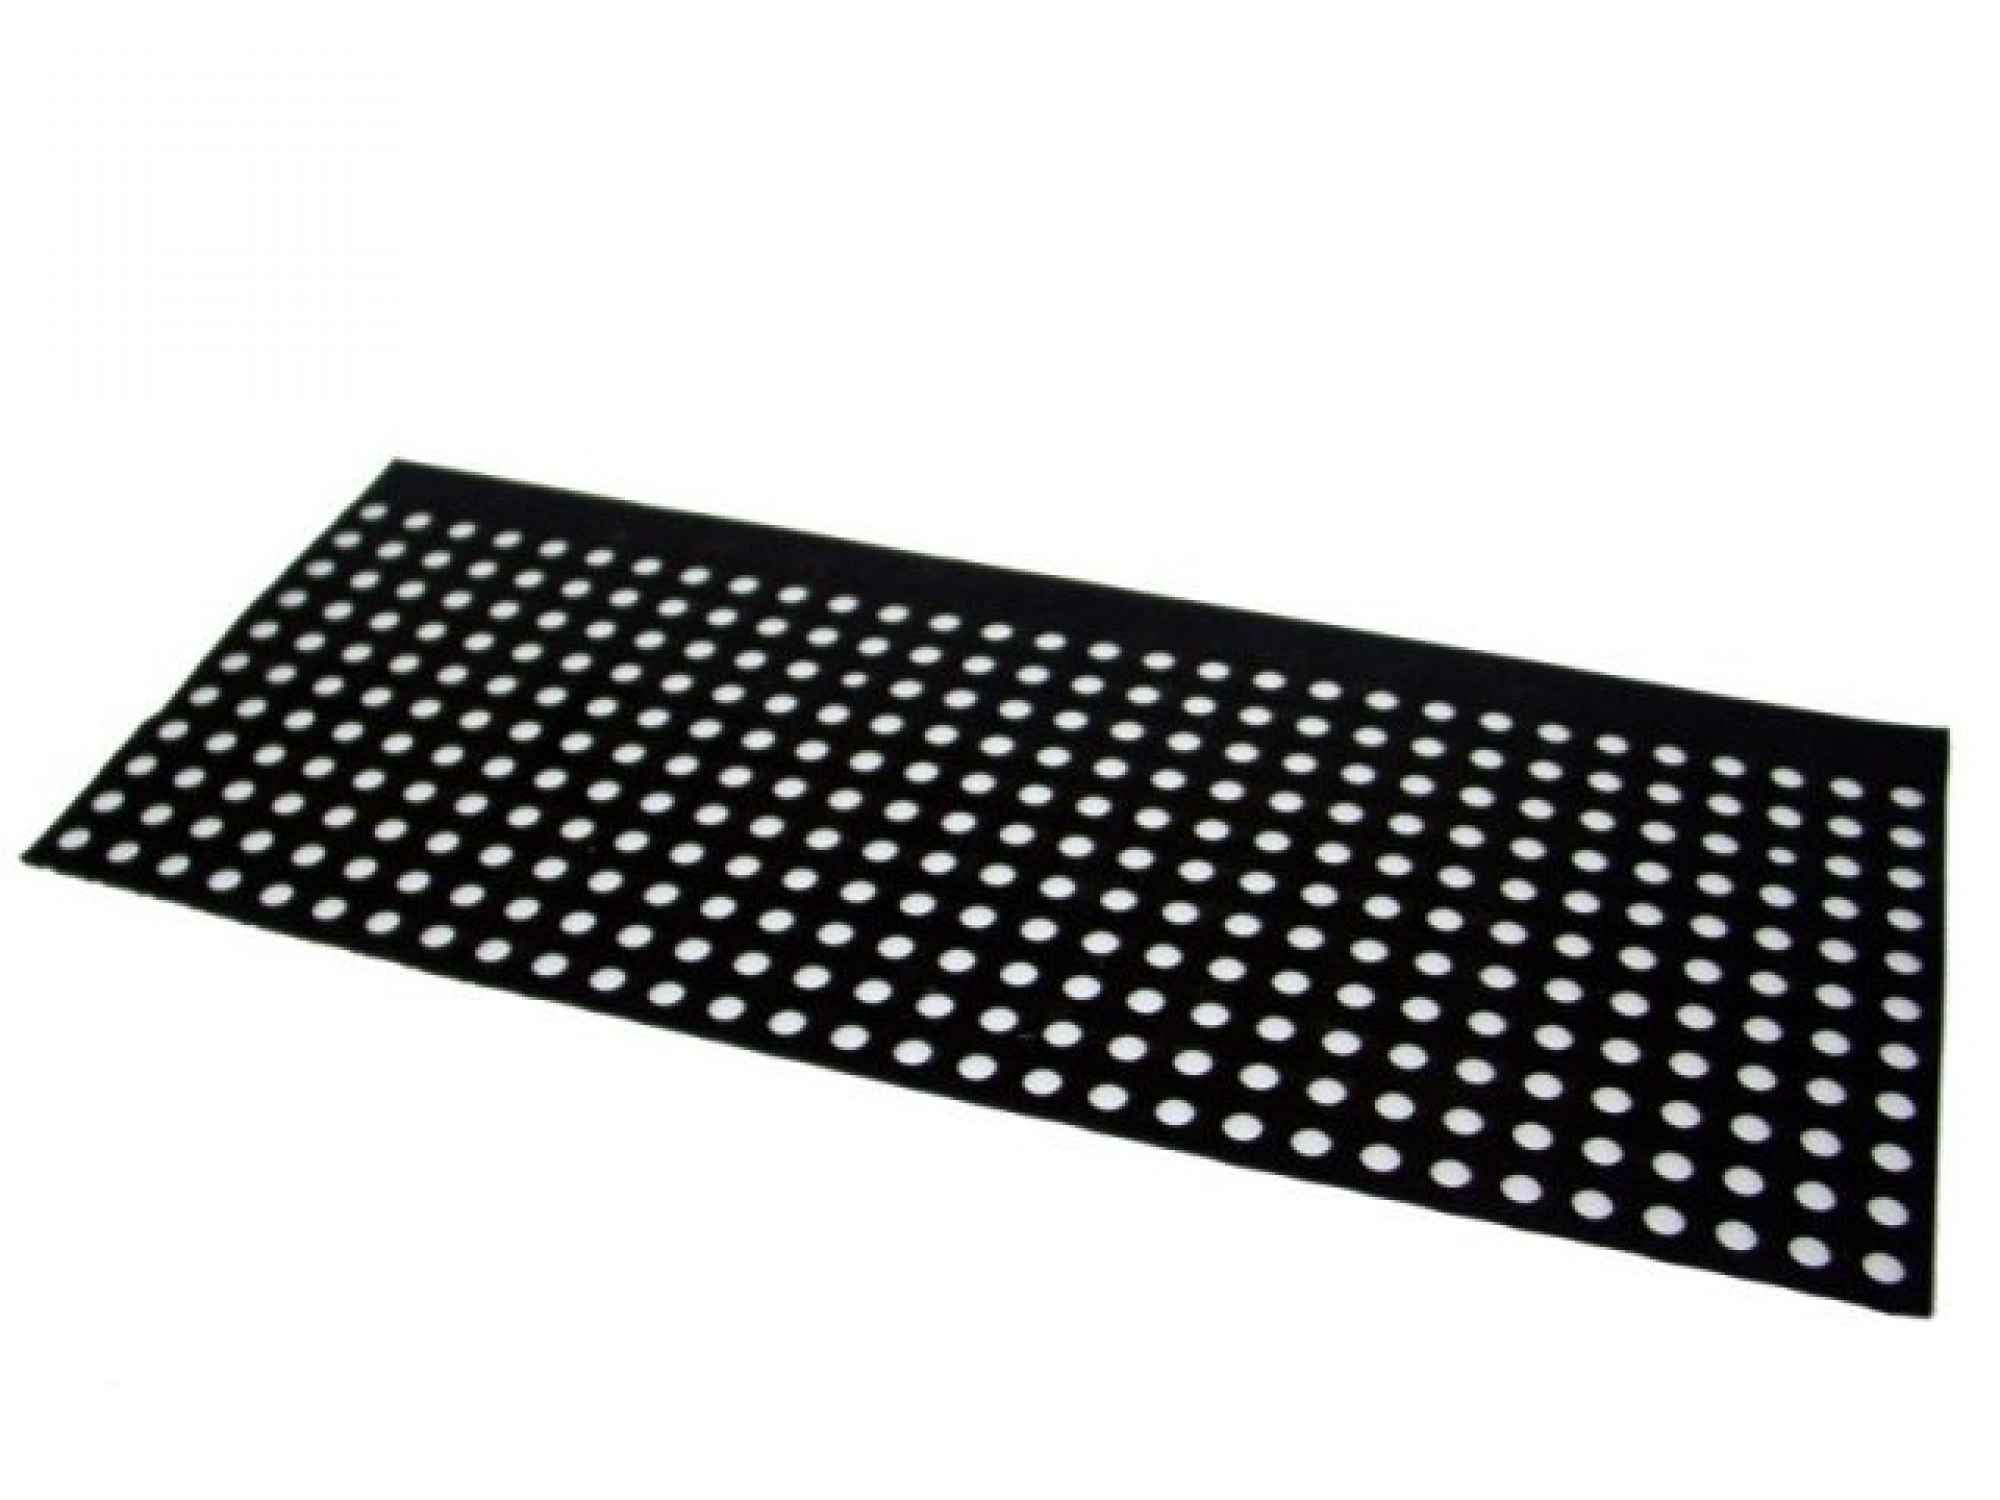 Perforated rubber mat 320 x 240 mm